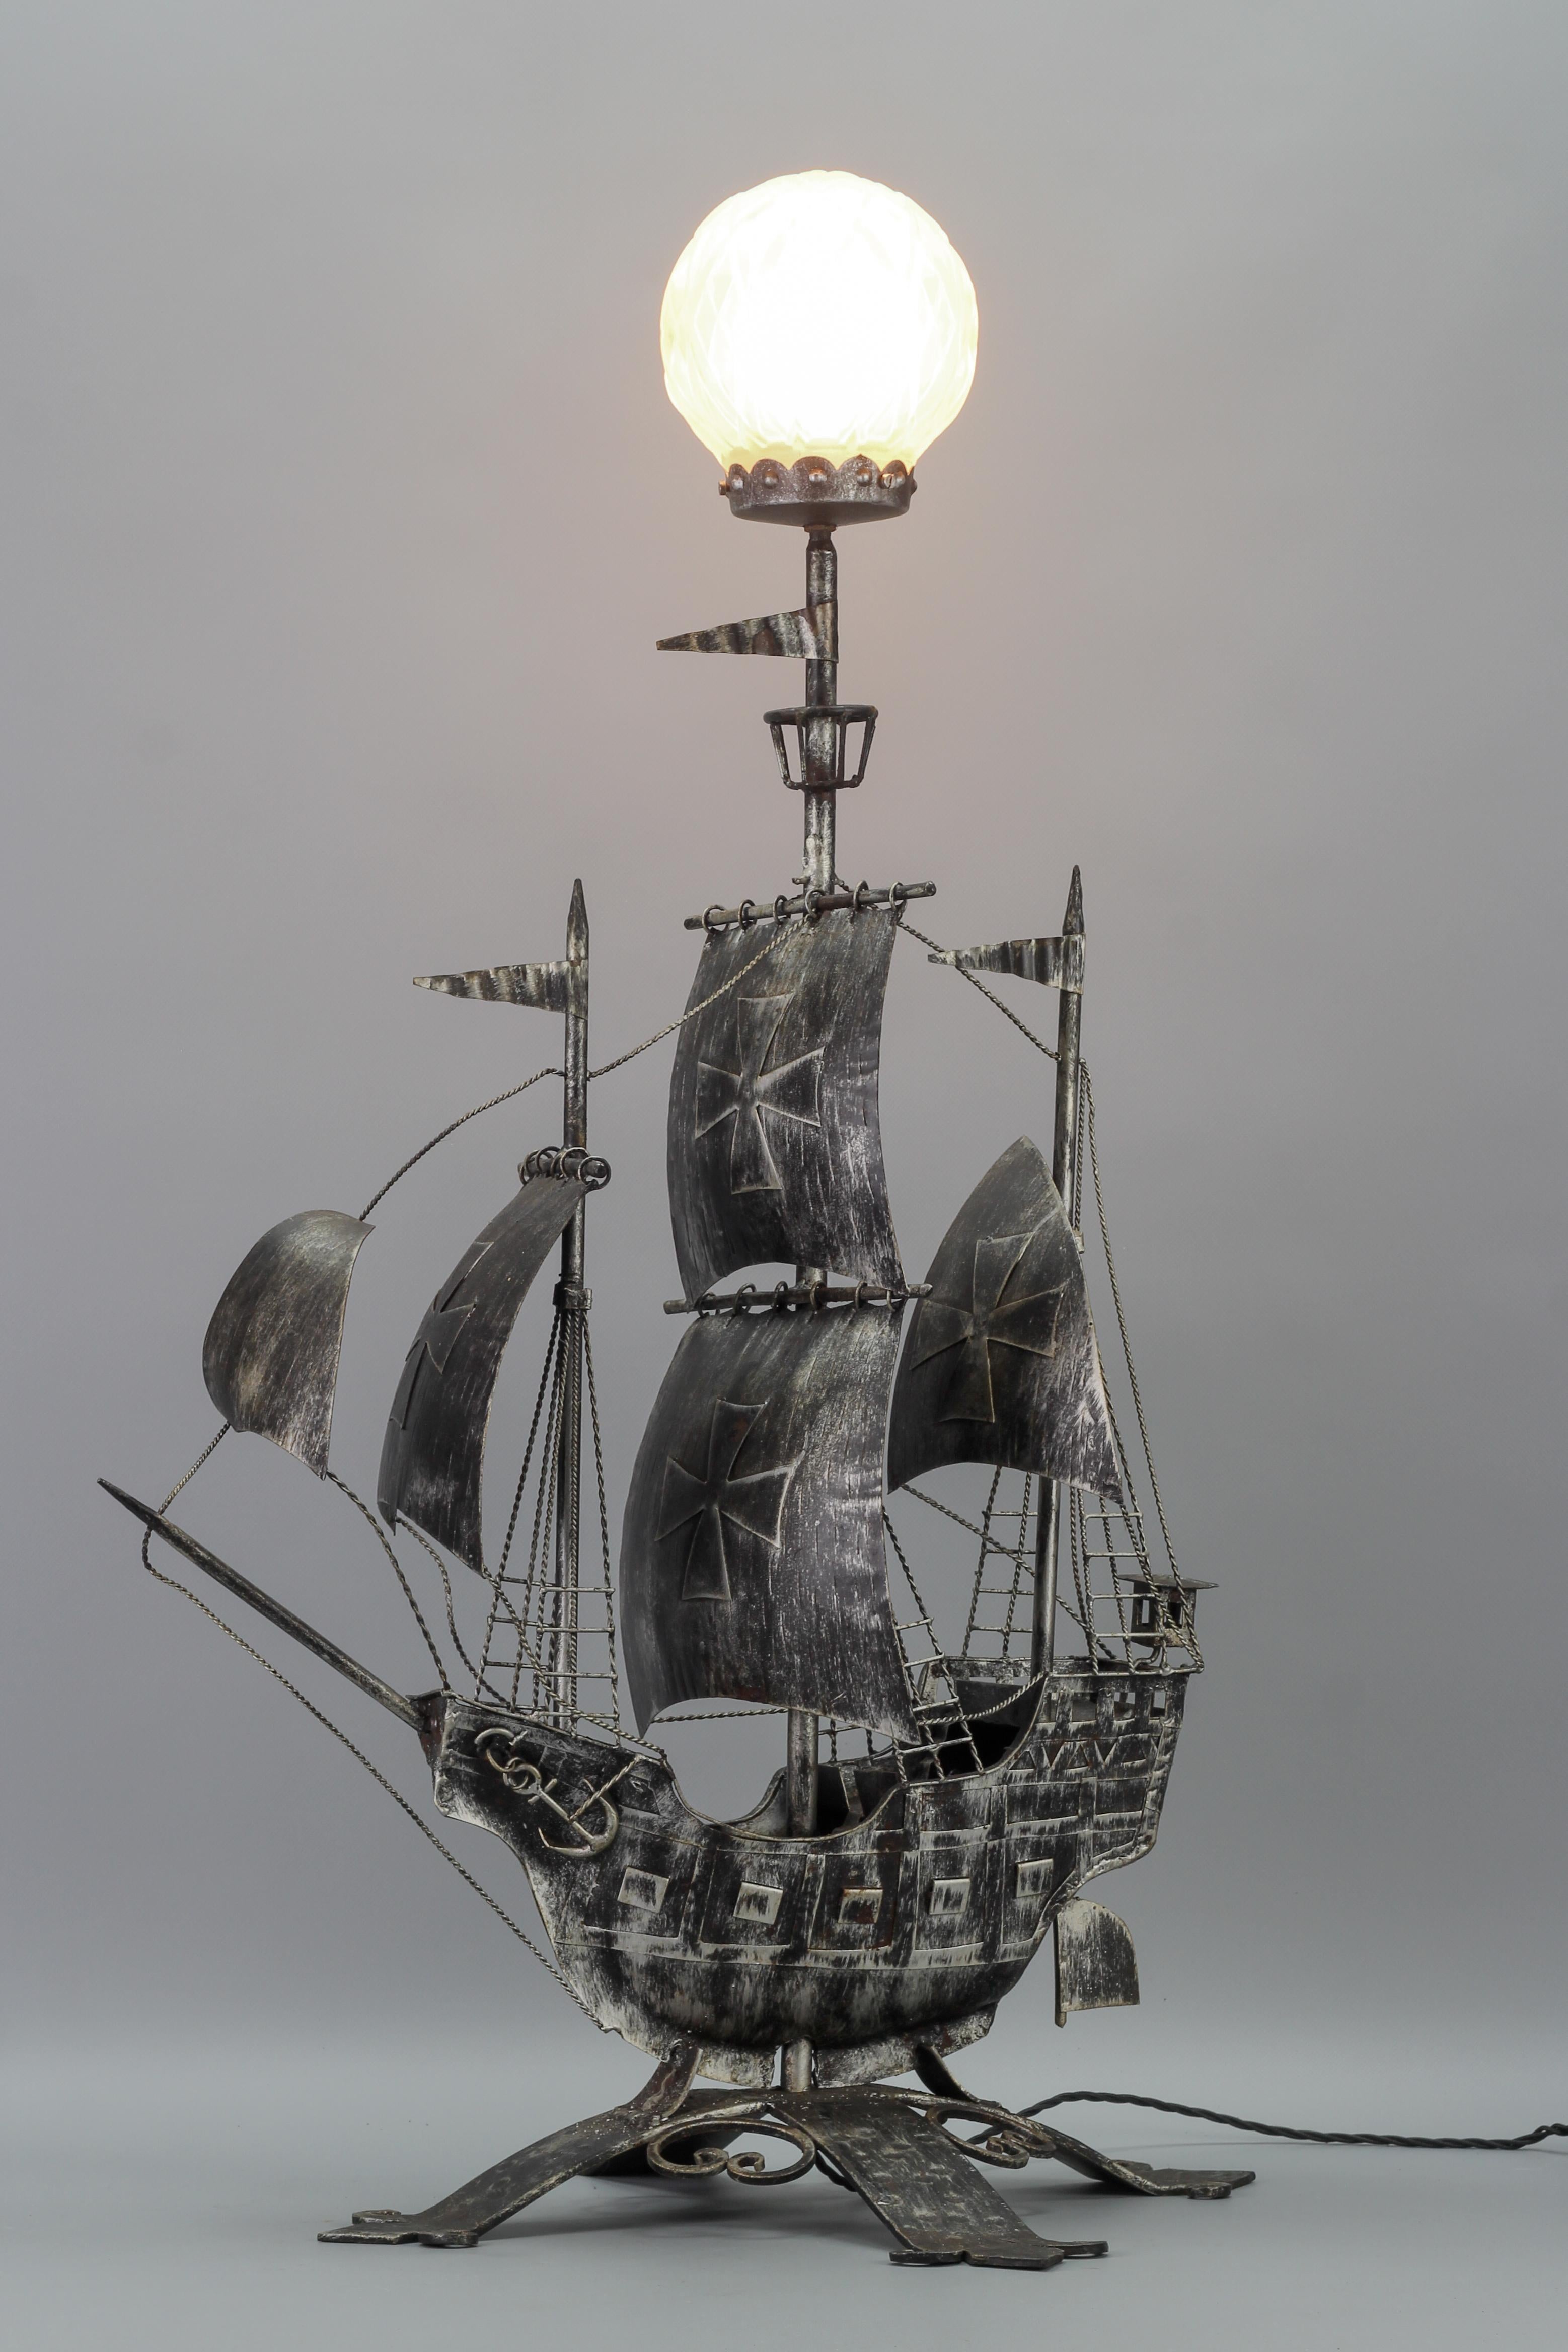 Wrought Iron and Glass Spanish Galleon Sailing Ship Shaped Floor Lamp, 1950s For Sale 9